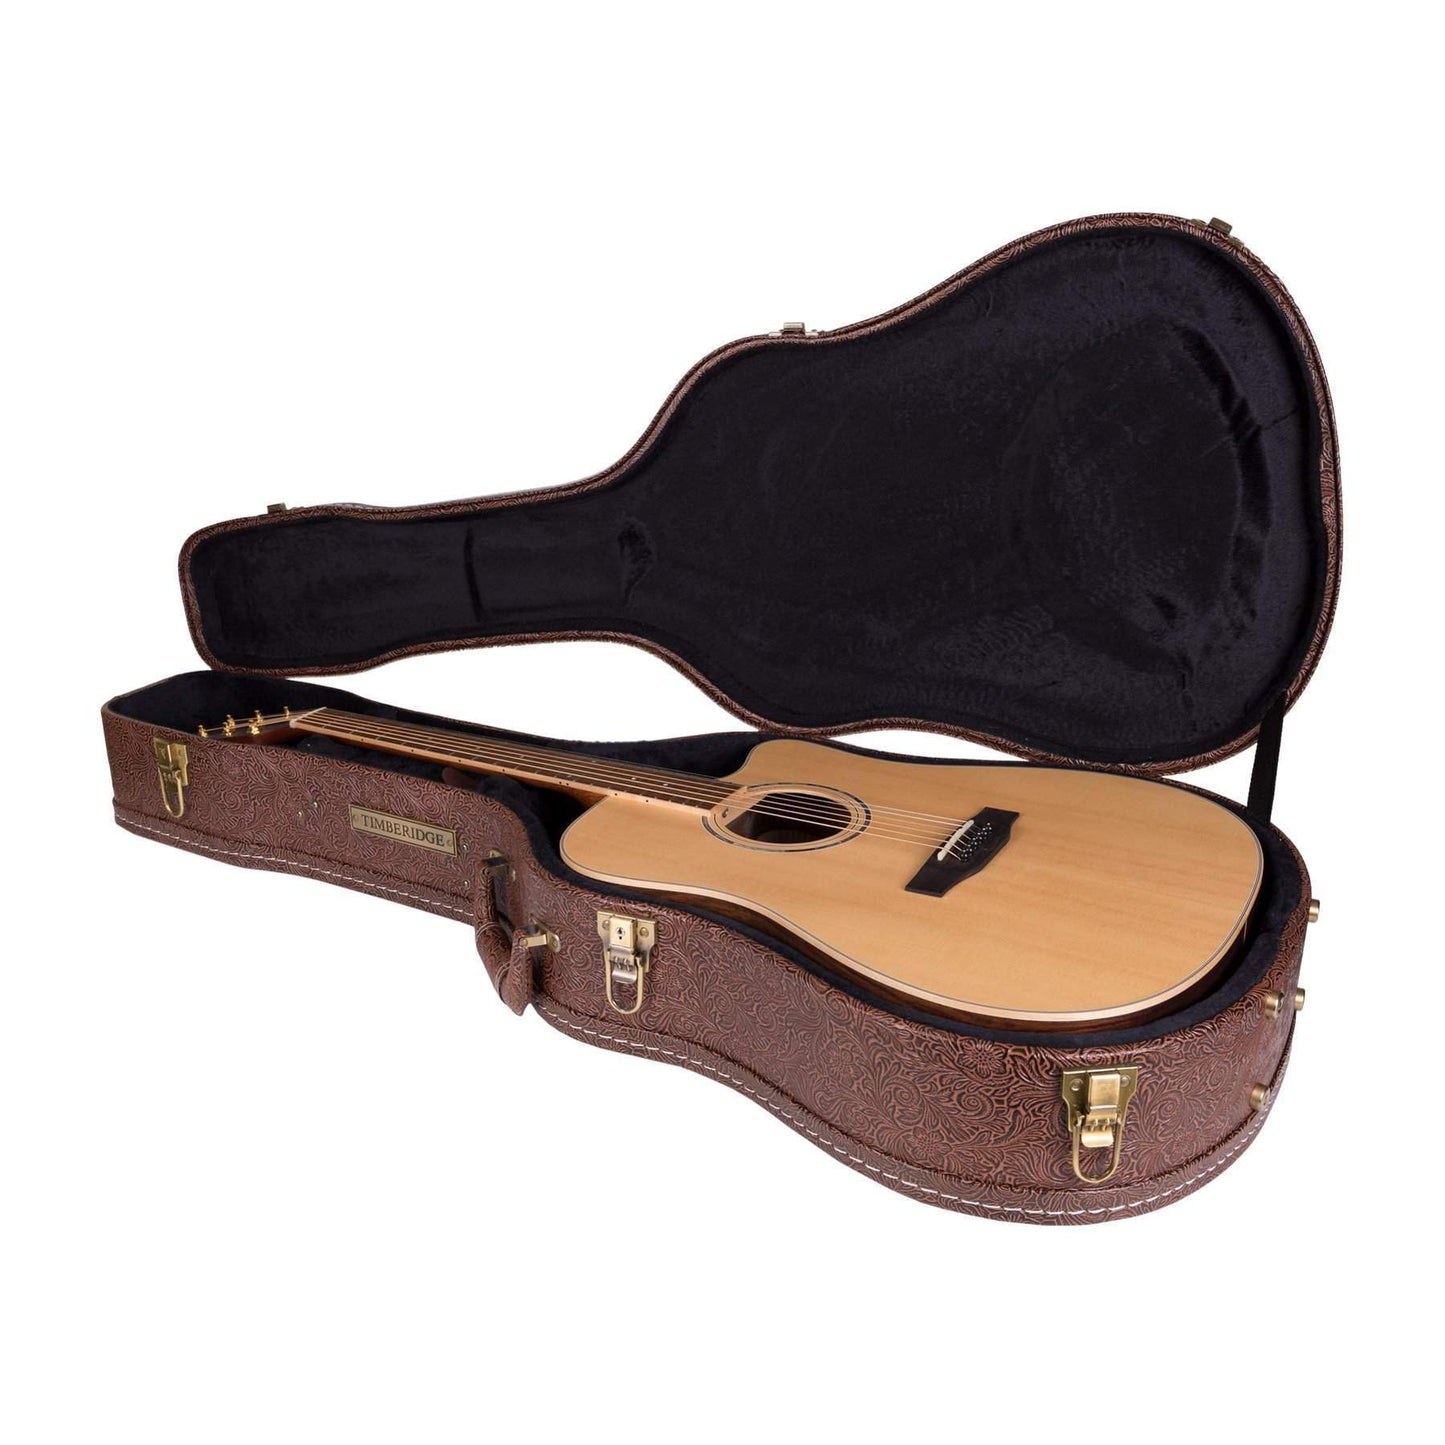 Timberidge Deluxe Shaped Dreadnought Acoustic Guitar Hard Case (Paisley Brown)